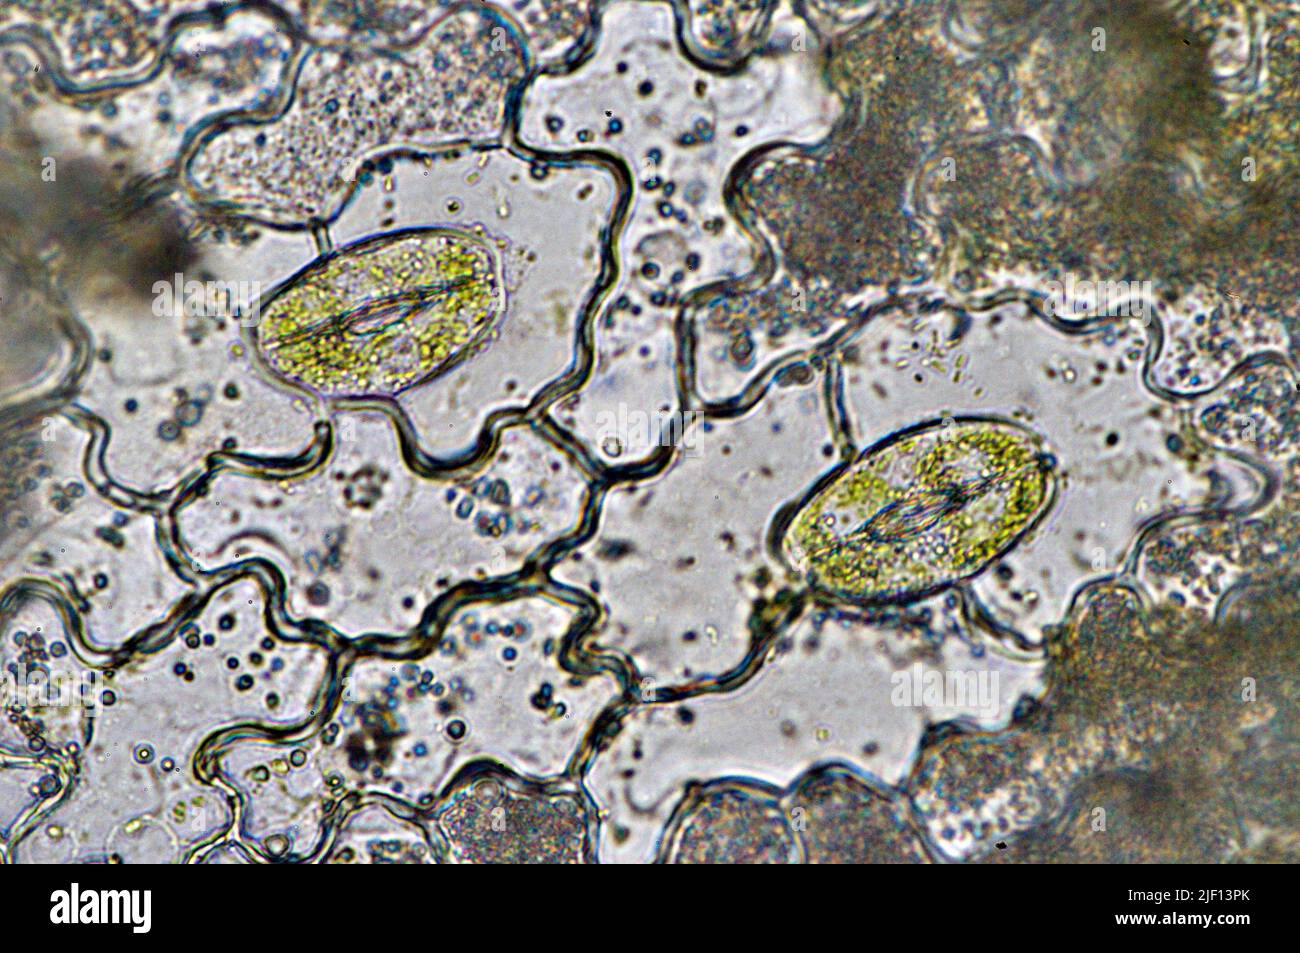 Stomata from the leaf of a windo plant. Stock Photo